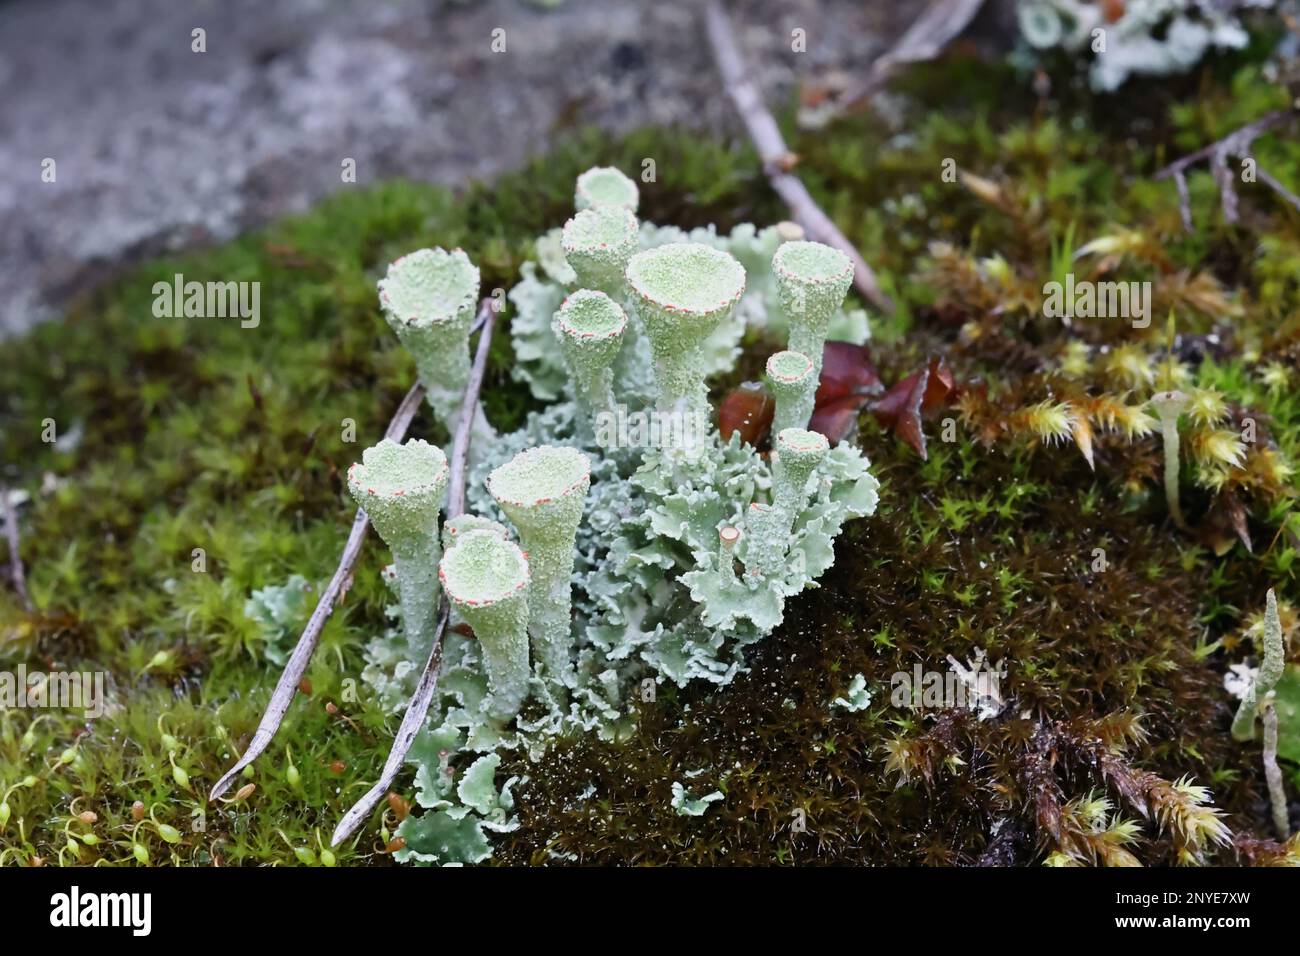 Cladonia deformis, also known as the lesser sulphur cup, lichen from Finland Stock Photo